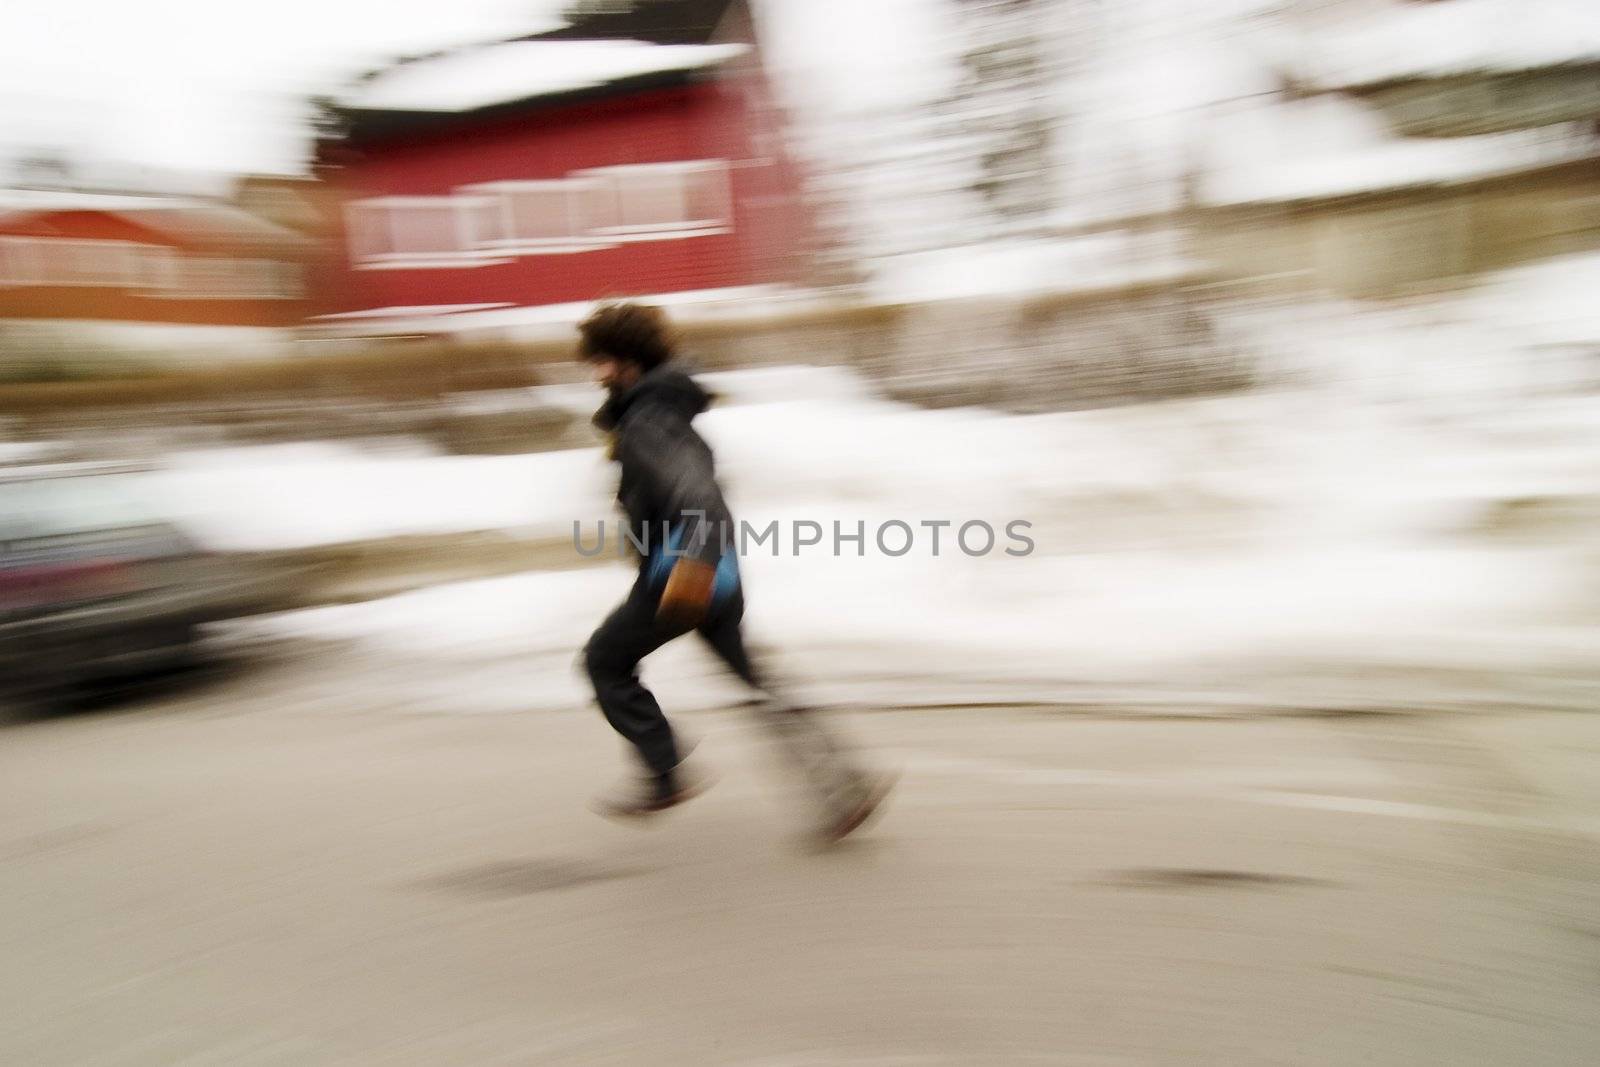 A motion blur abstract of a person walking in a hurry, a late or panic rushing concept image.